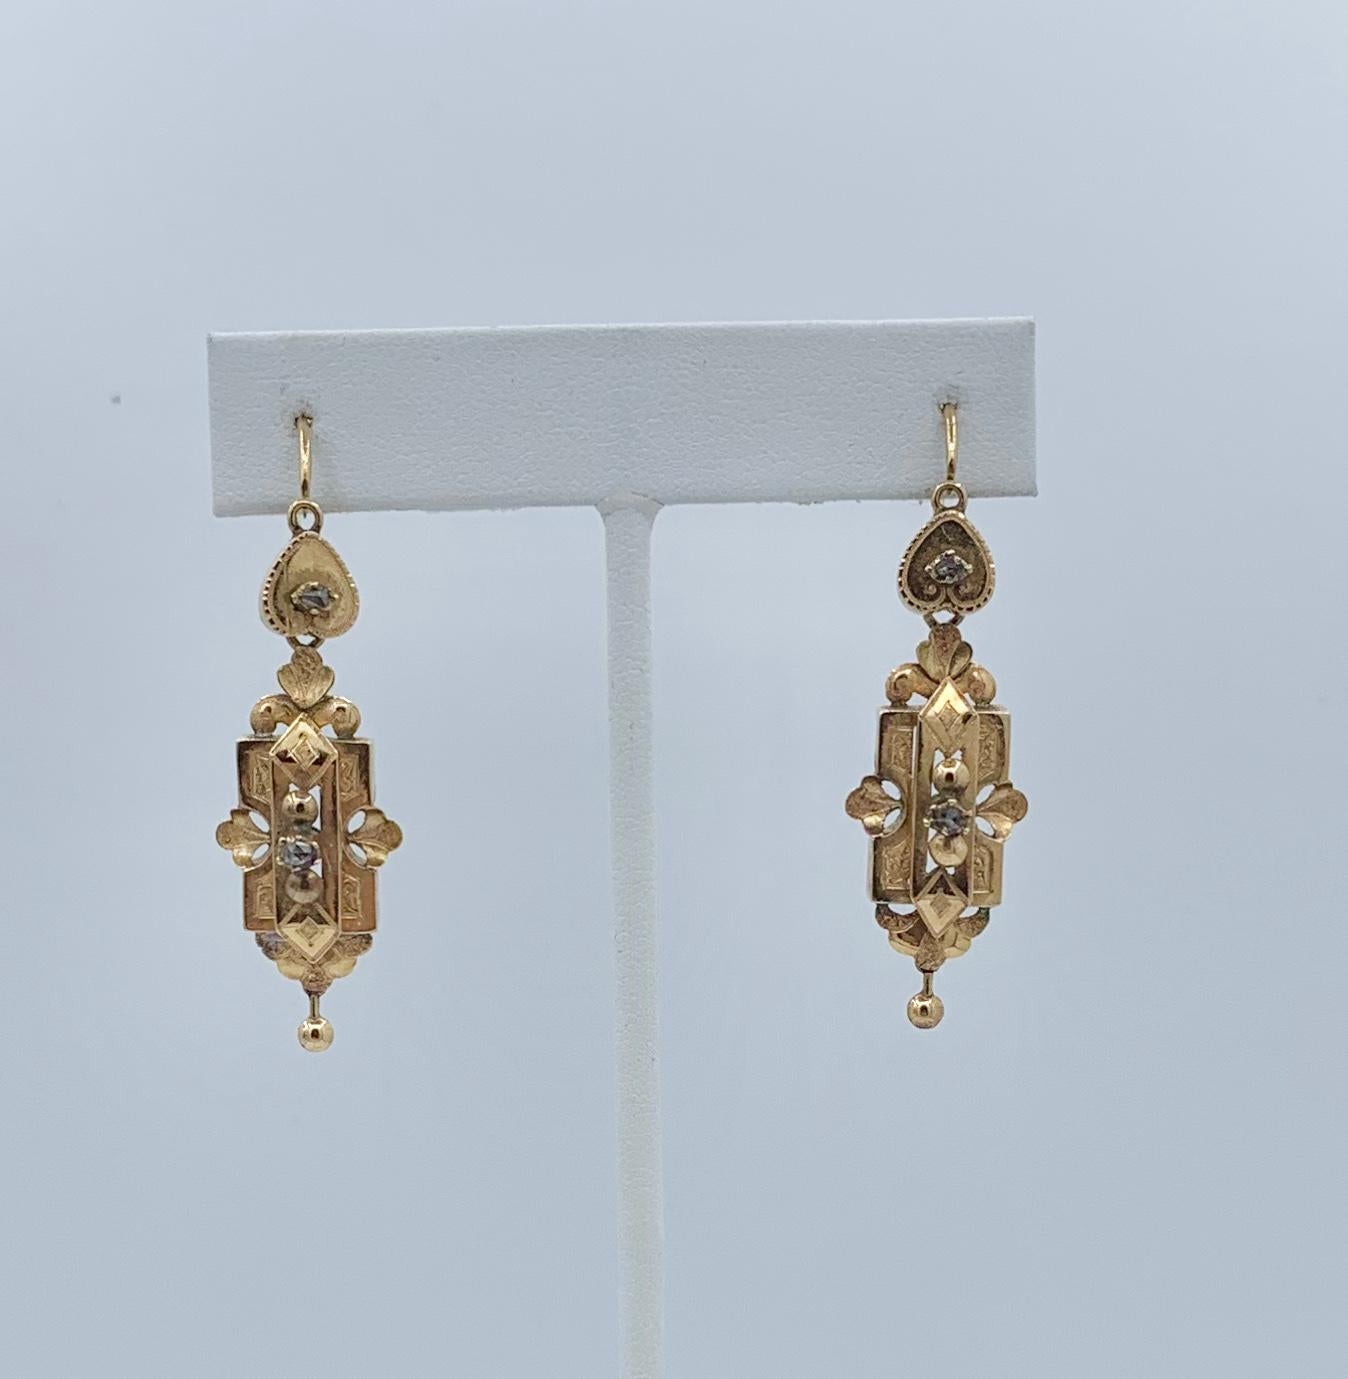 This is very rare pair of early Rose Cut Diamond Antique Georgian - Victorian Dangle Drop Day Night Earrings in 14 Karat Gold with a heart motif.   These antique earrings are of the highest quality.  They have extraordinary design with wonderful